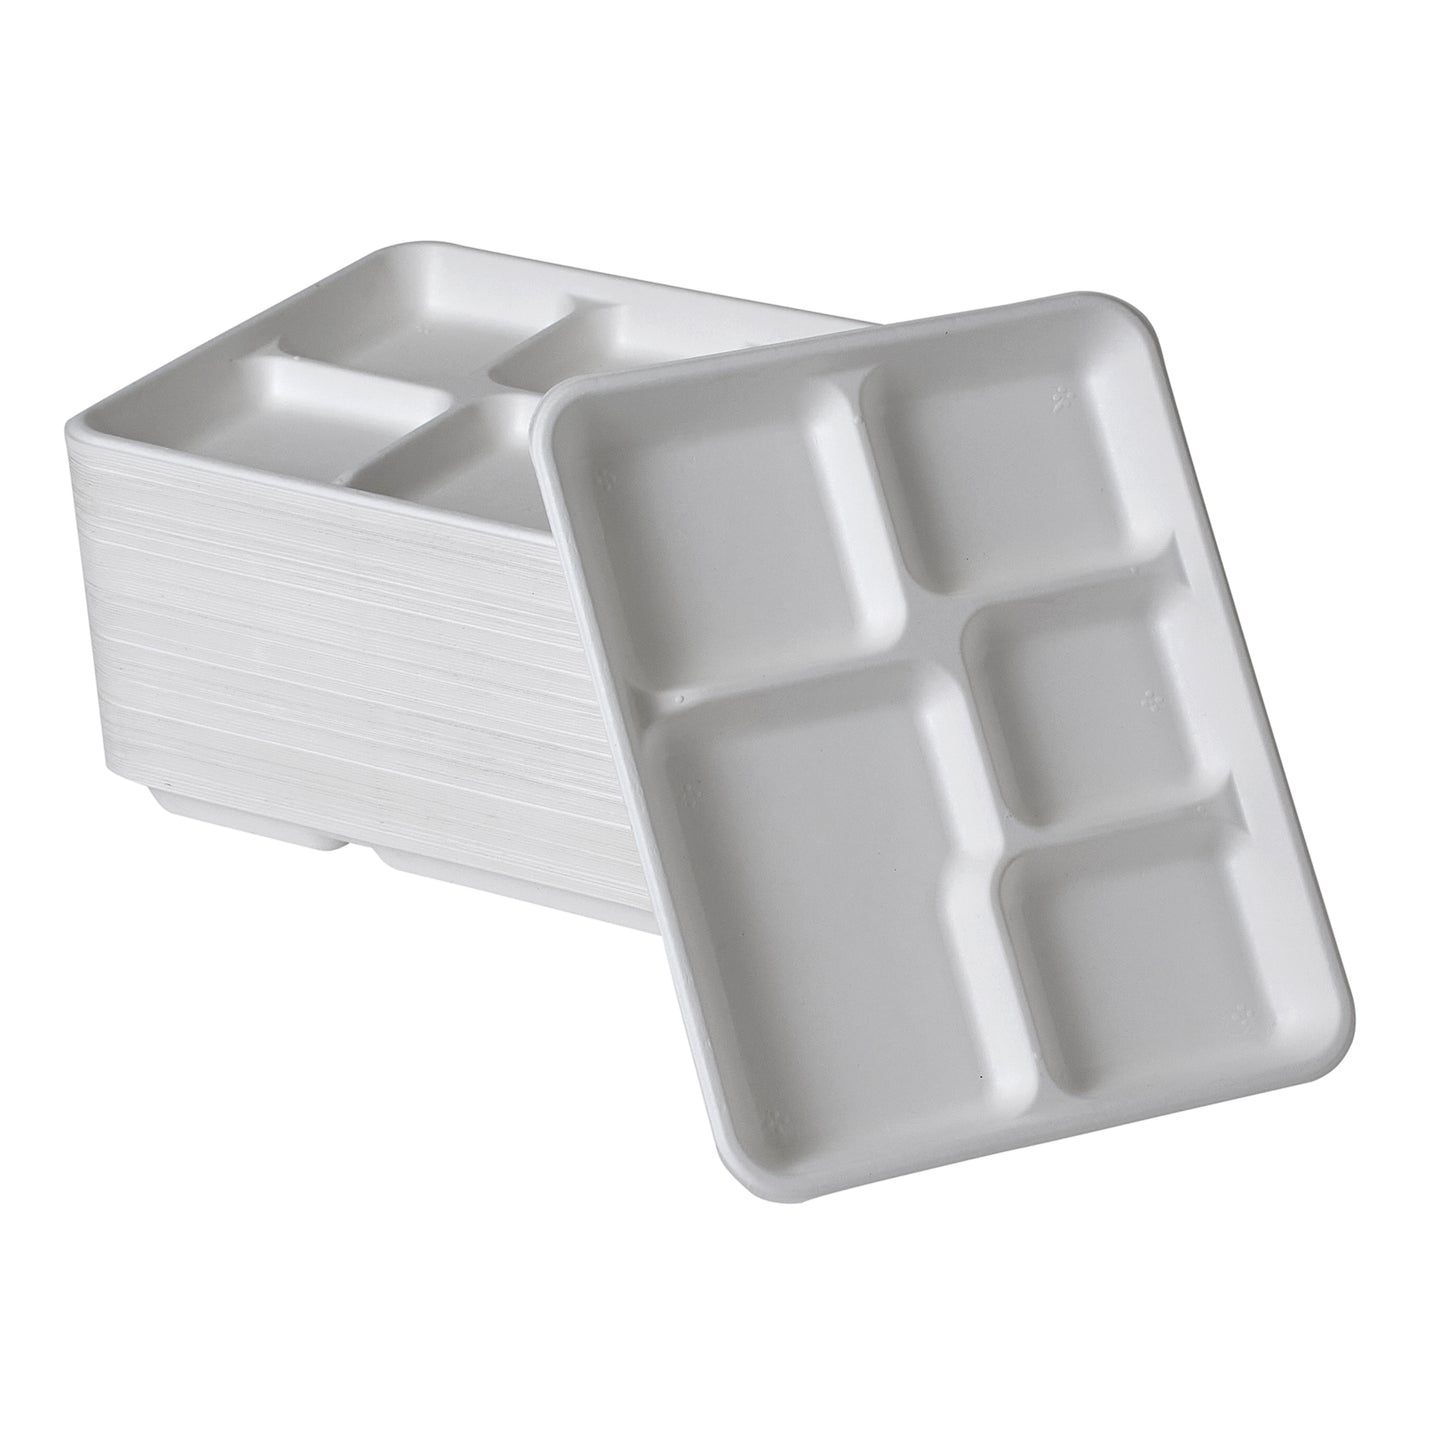 [100-Pack] compostable plates 5-Compartment rectangle white biodegradable Bagasse  10 inch plates